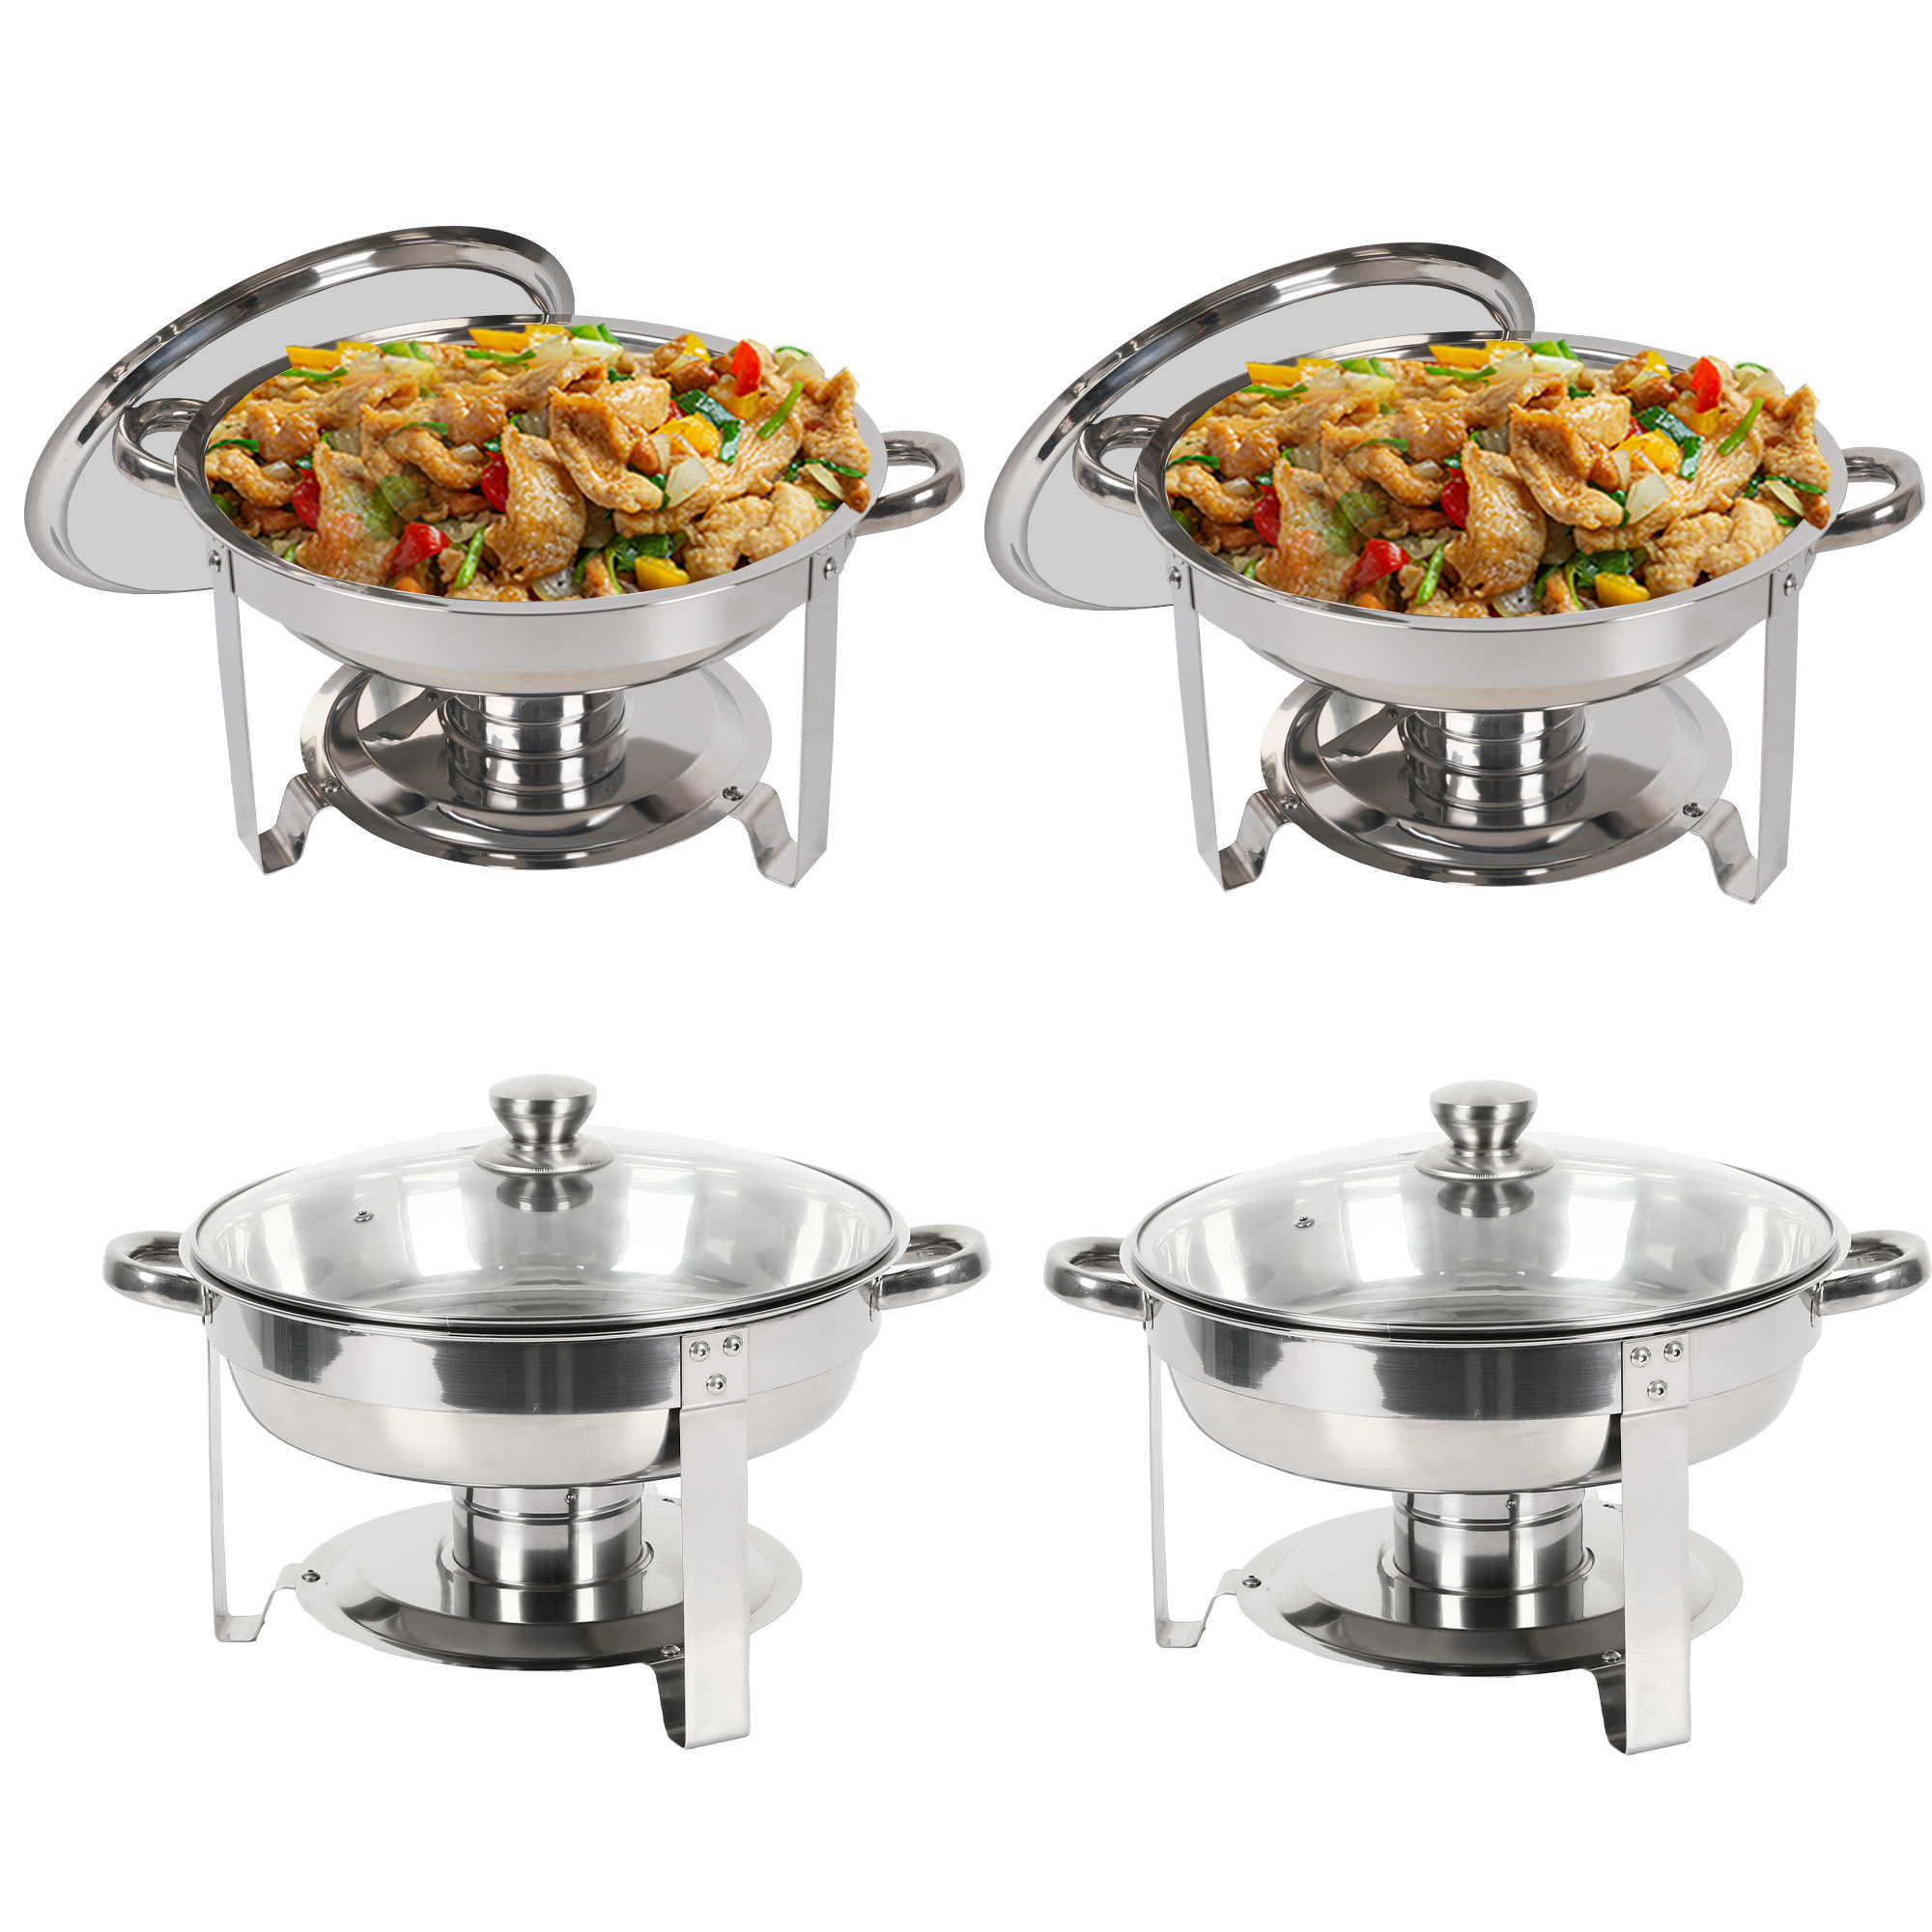 The Party Aisle™ 5QT Chafing Dish Buffet Set 4 Pack with Glass Lid, Round Stainless  Steel Chafer for Catering & Reviews